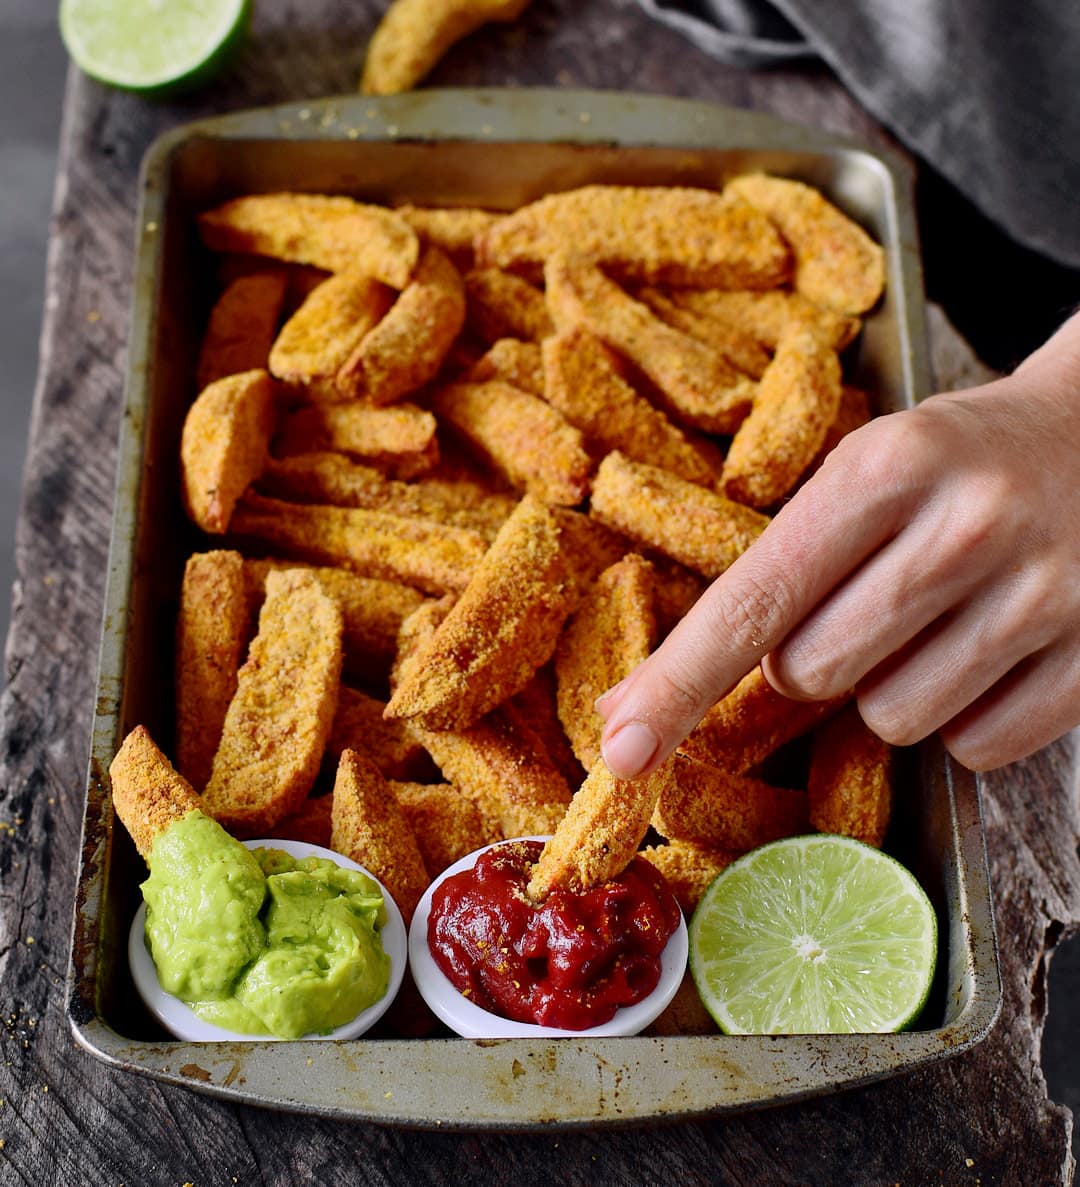 Eating oven-baked vegan parmesan potato wedges with guacamole dip and ketchup